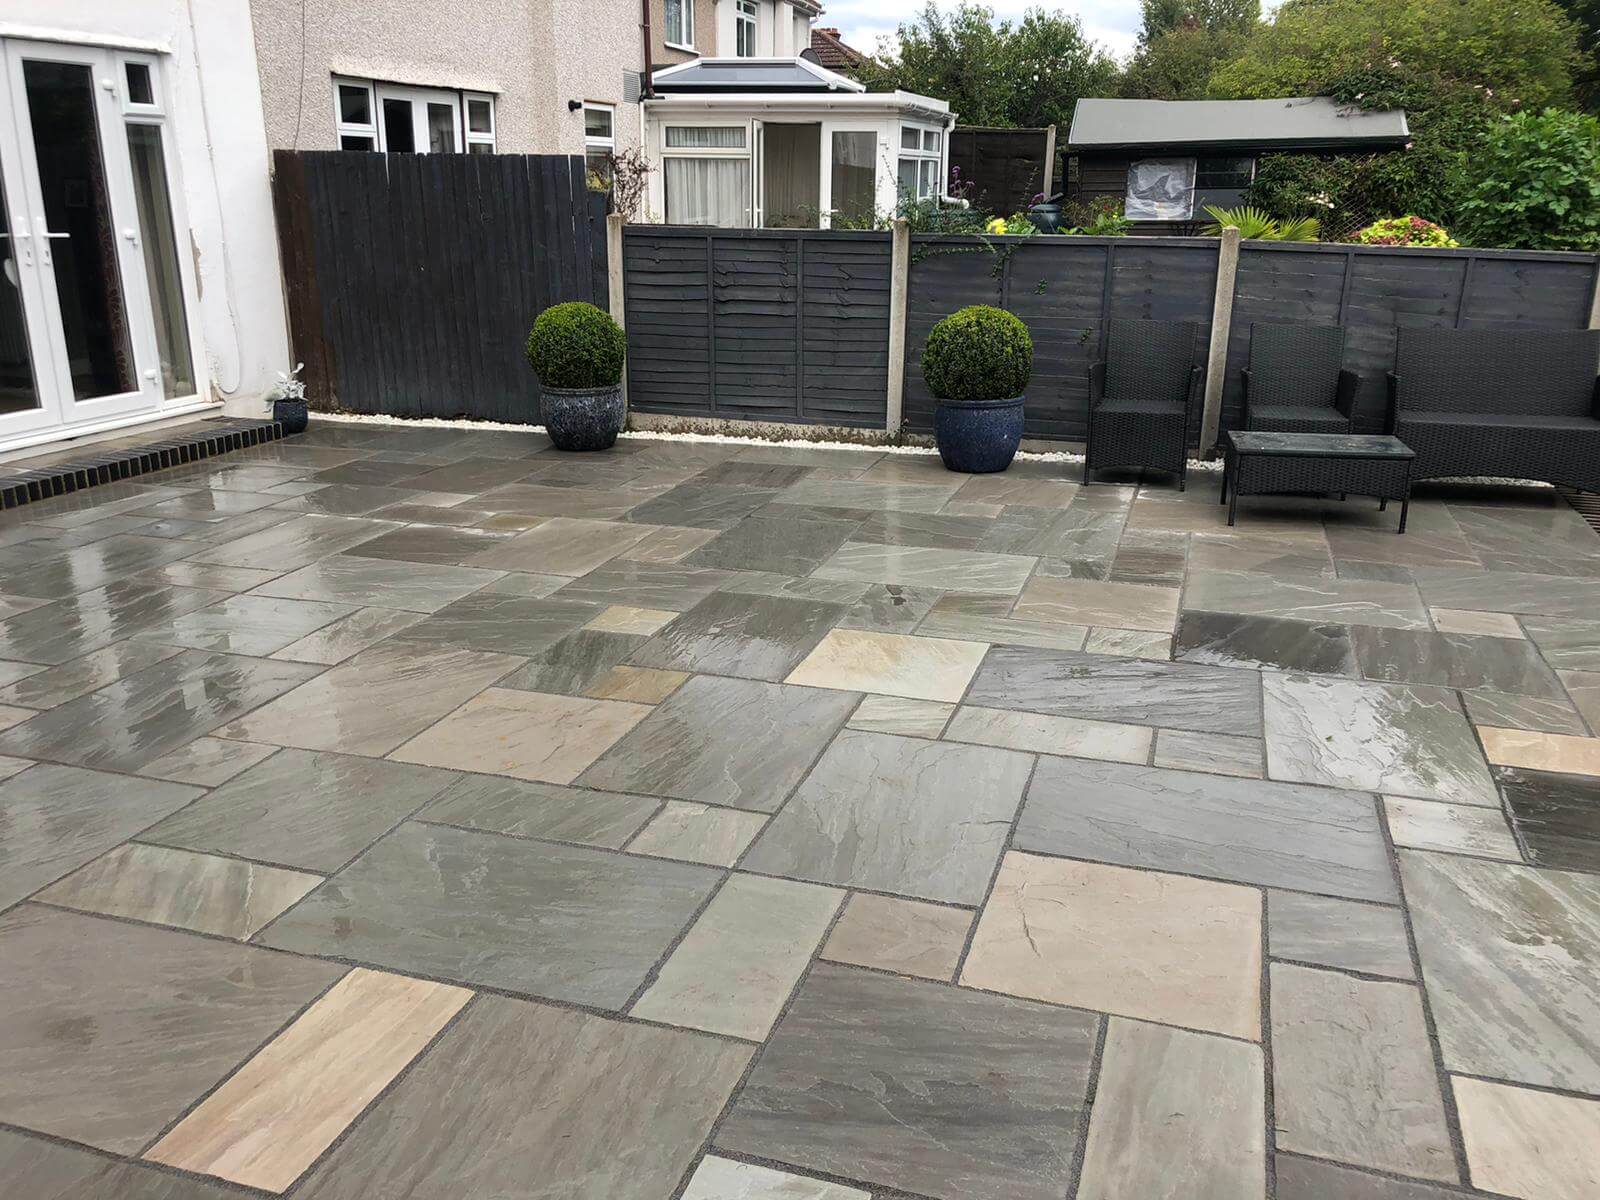 Indian Sandstone Paving Contractor Plumstead SE18